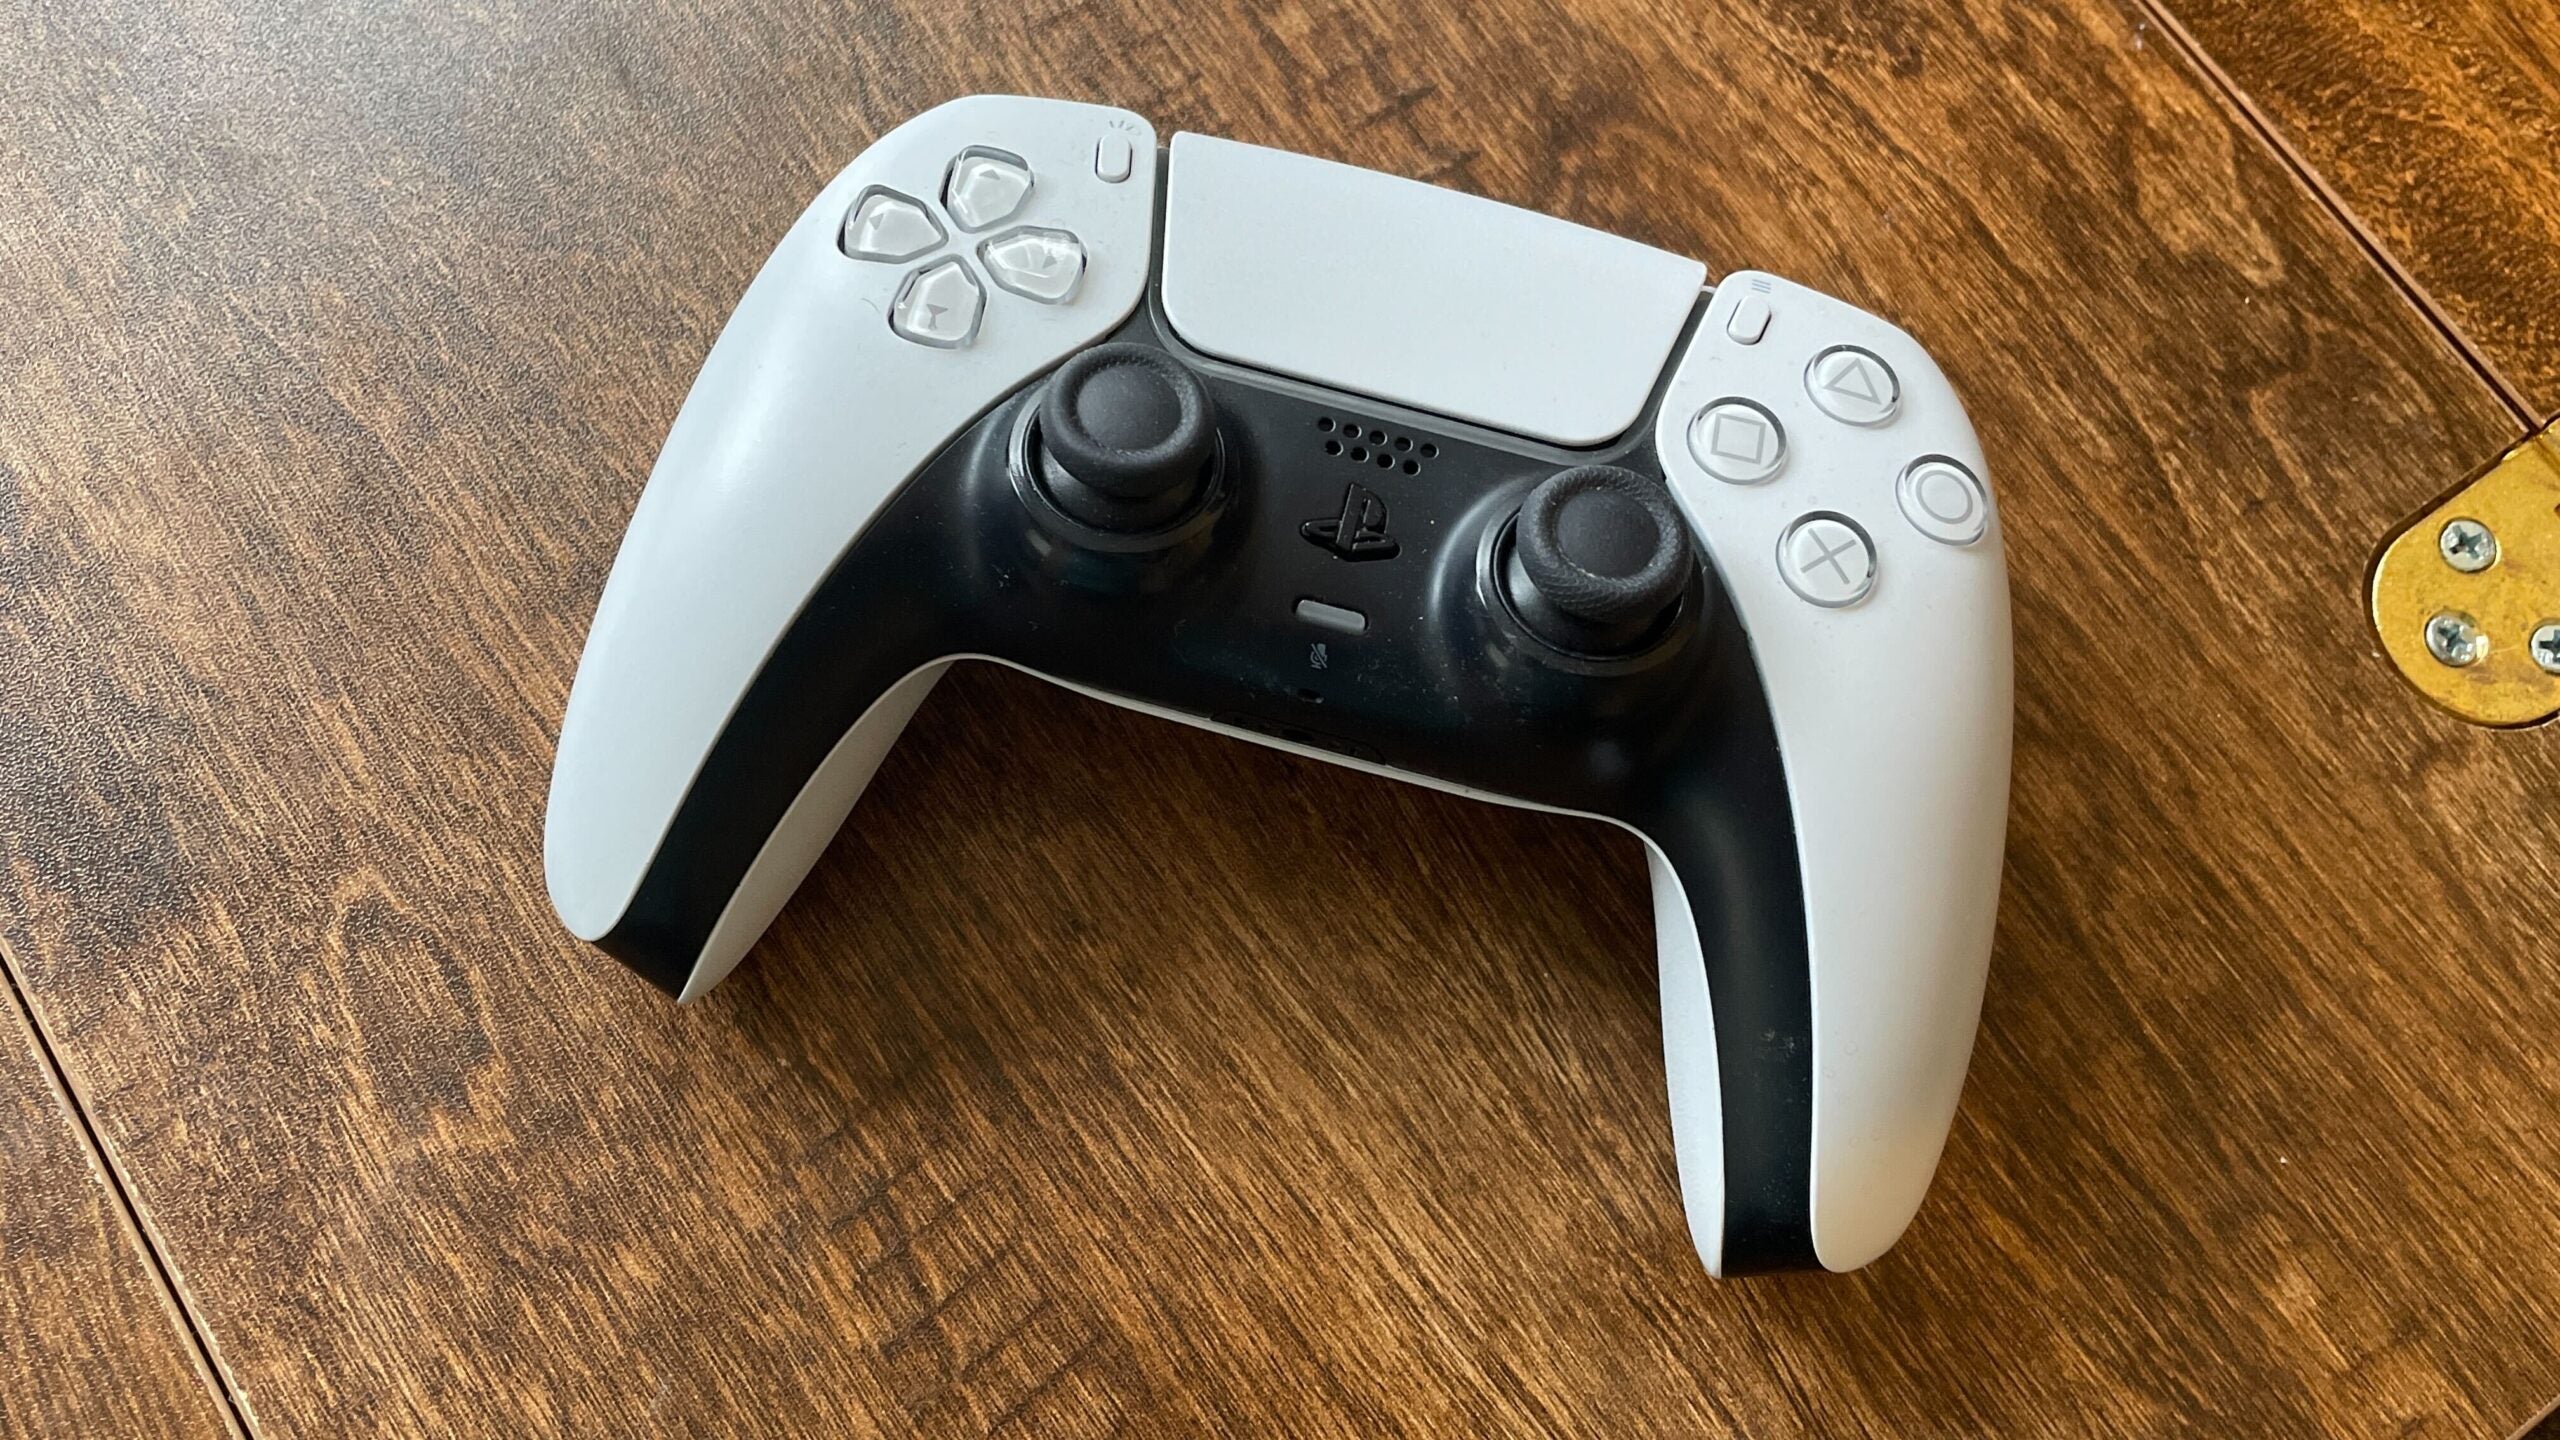 Playstation Dualsense Controller on a wood surface